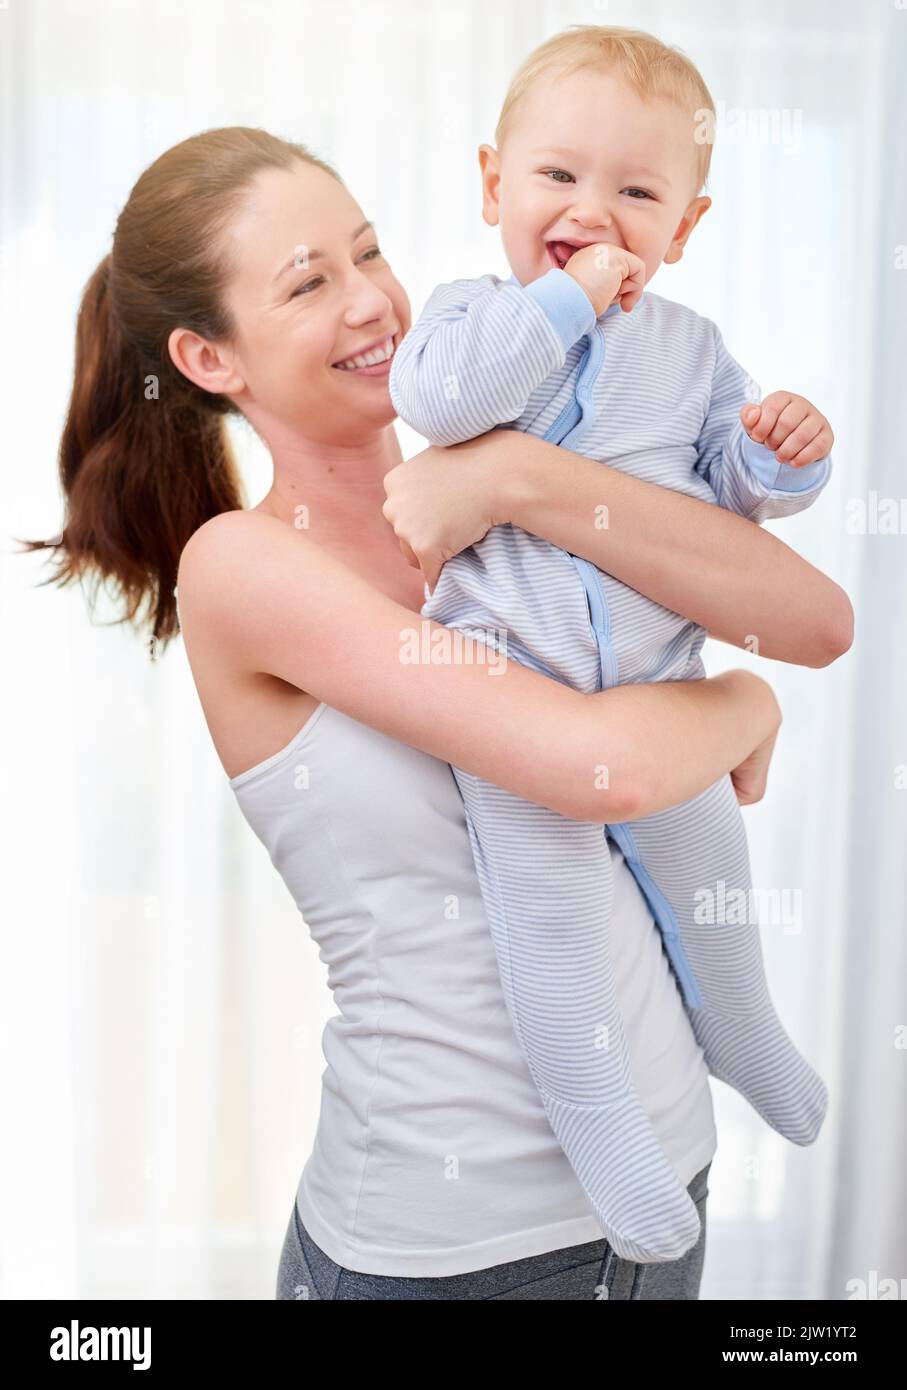 He makes working out fun to do. a mother bonding with her baby boy. Stock Photo